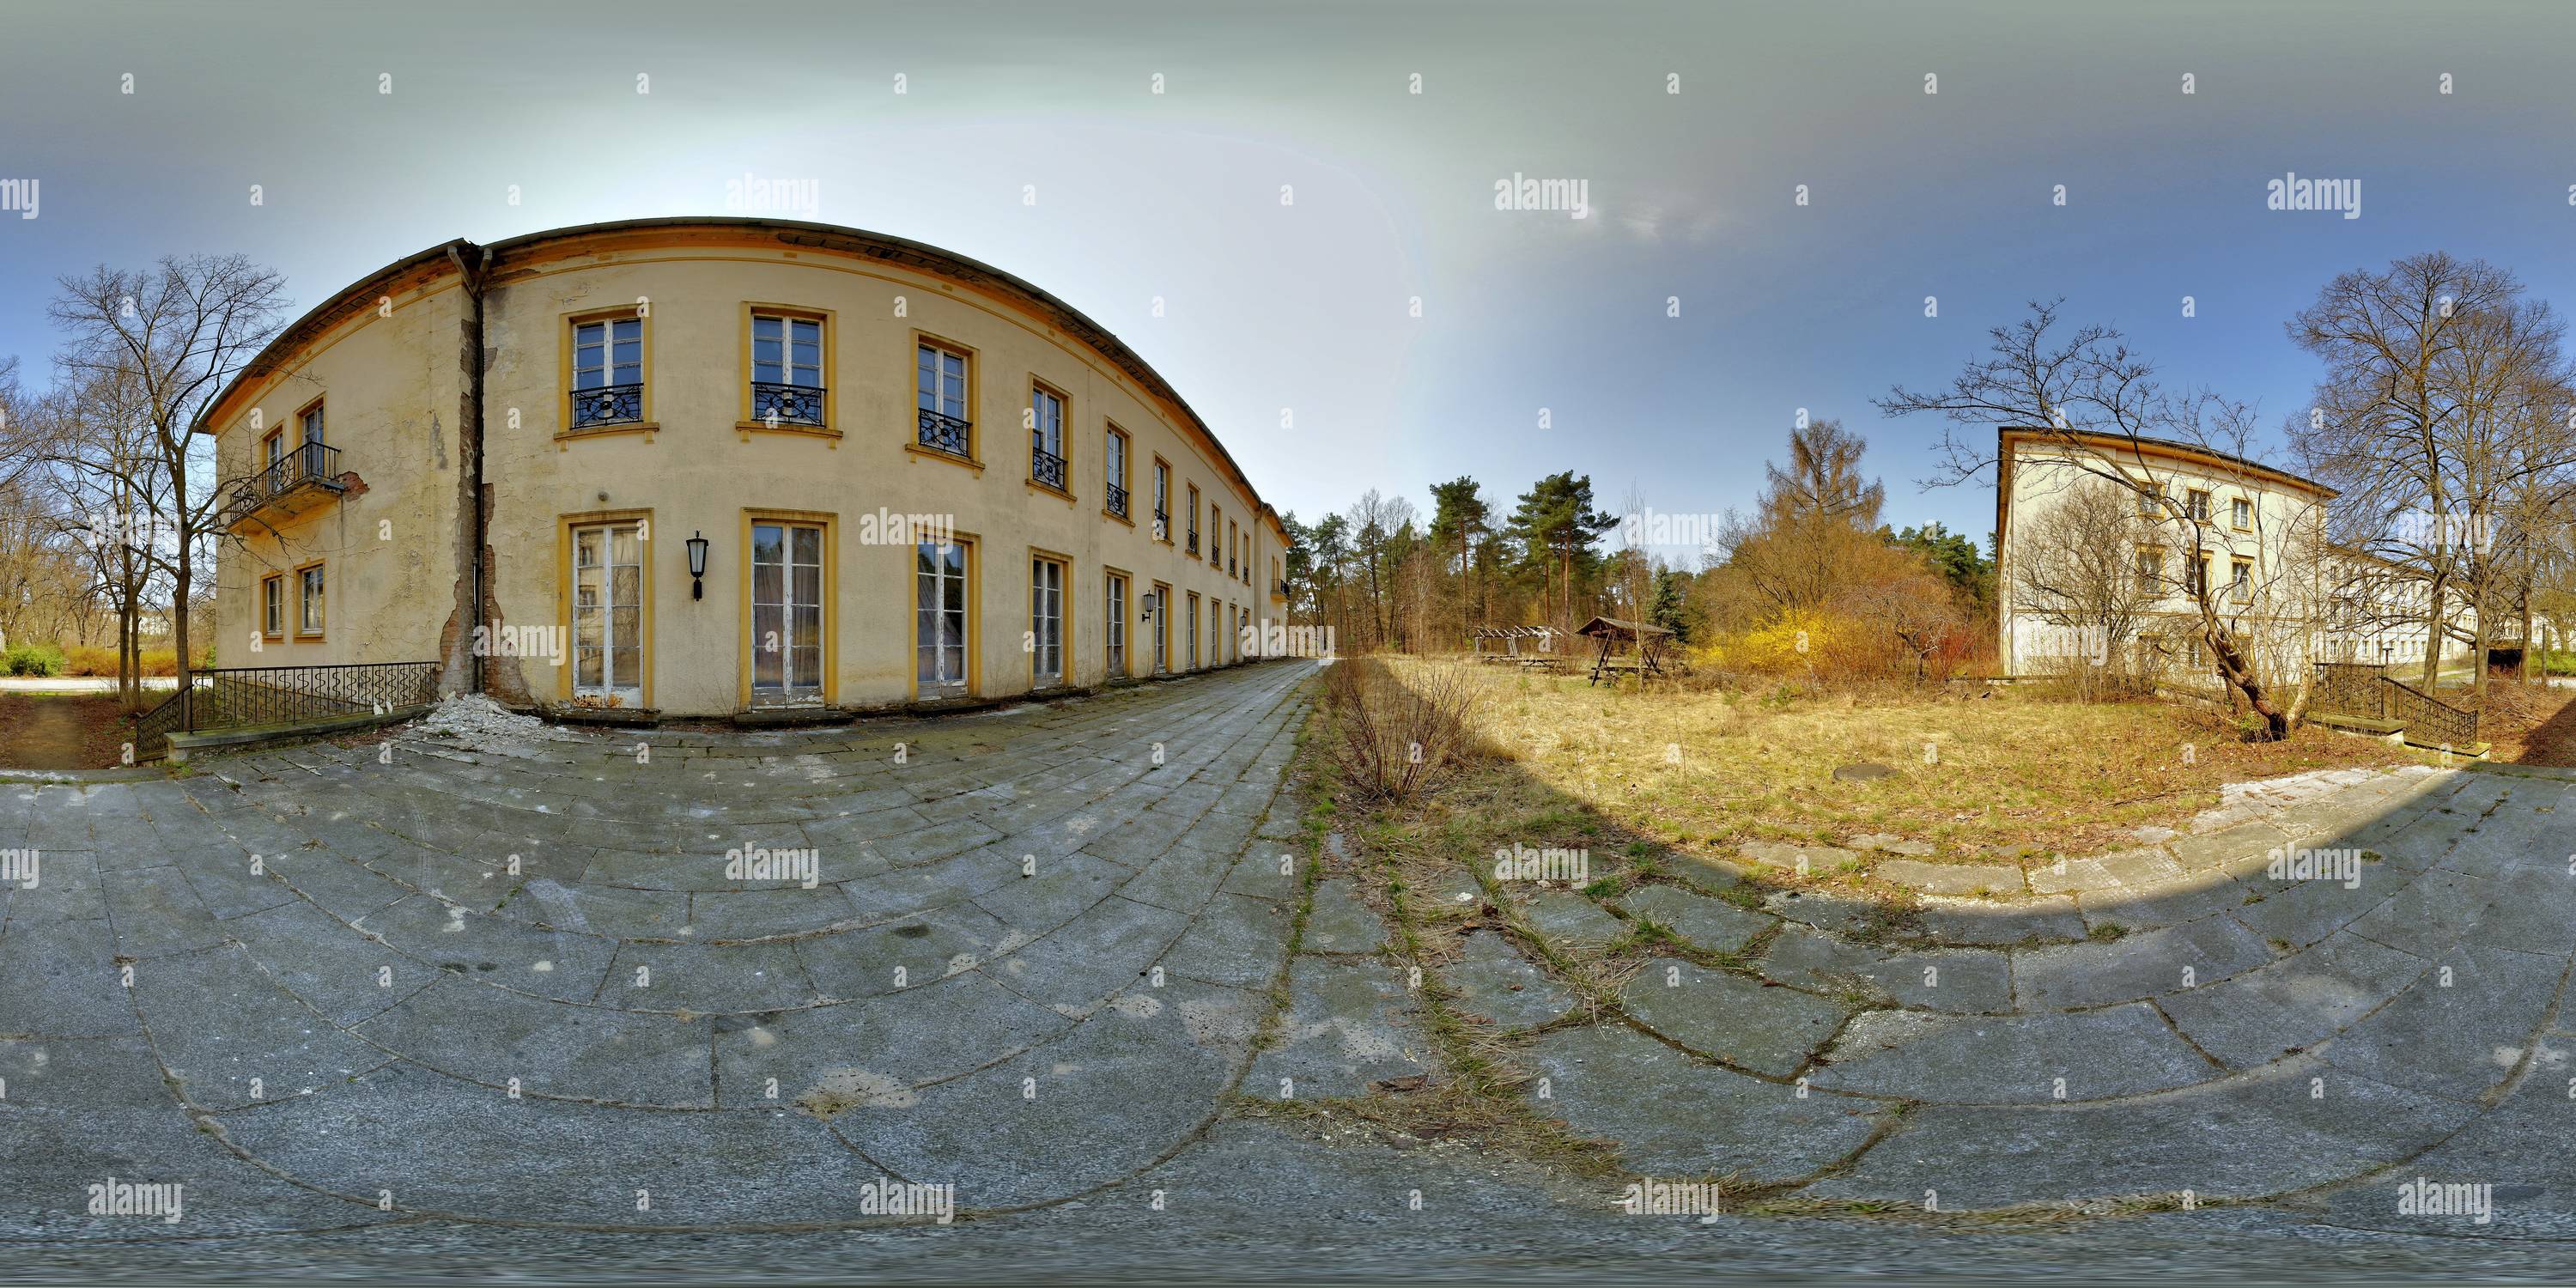 360 degree panoramic view of Fdj Jugendhochschule 1